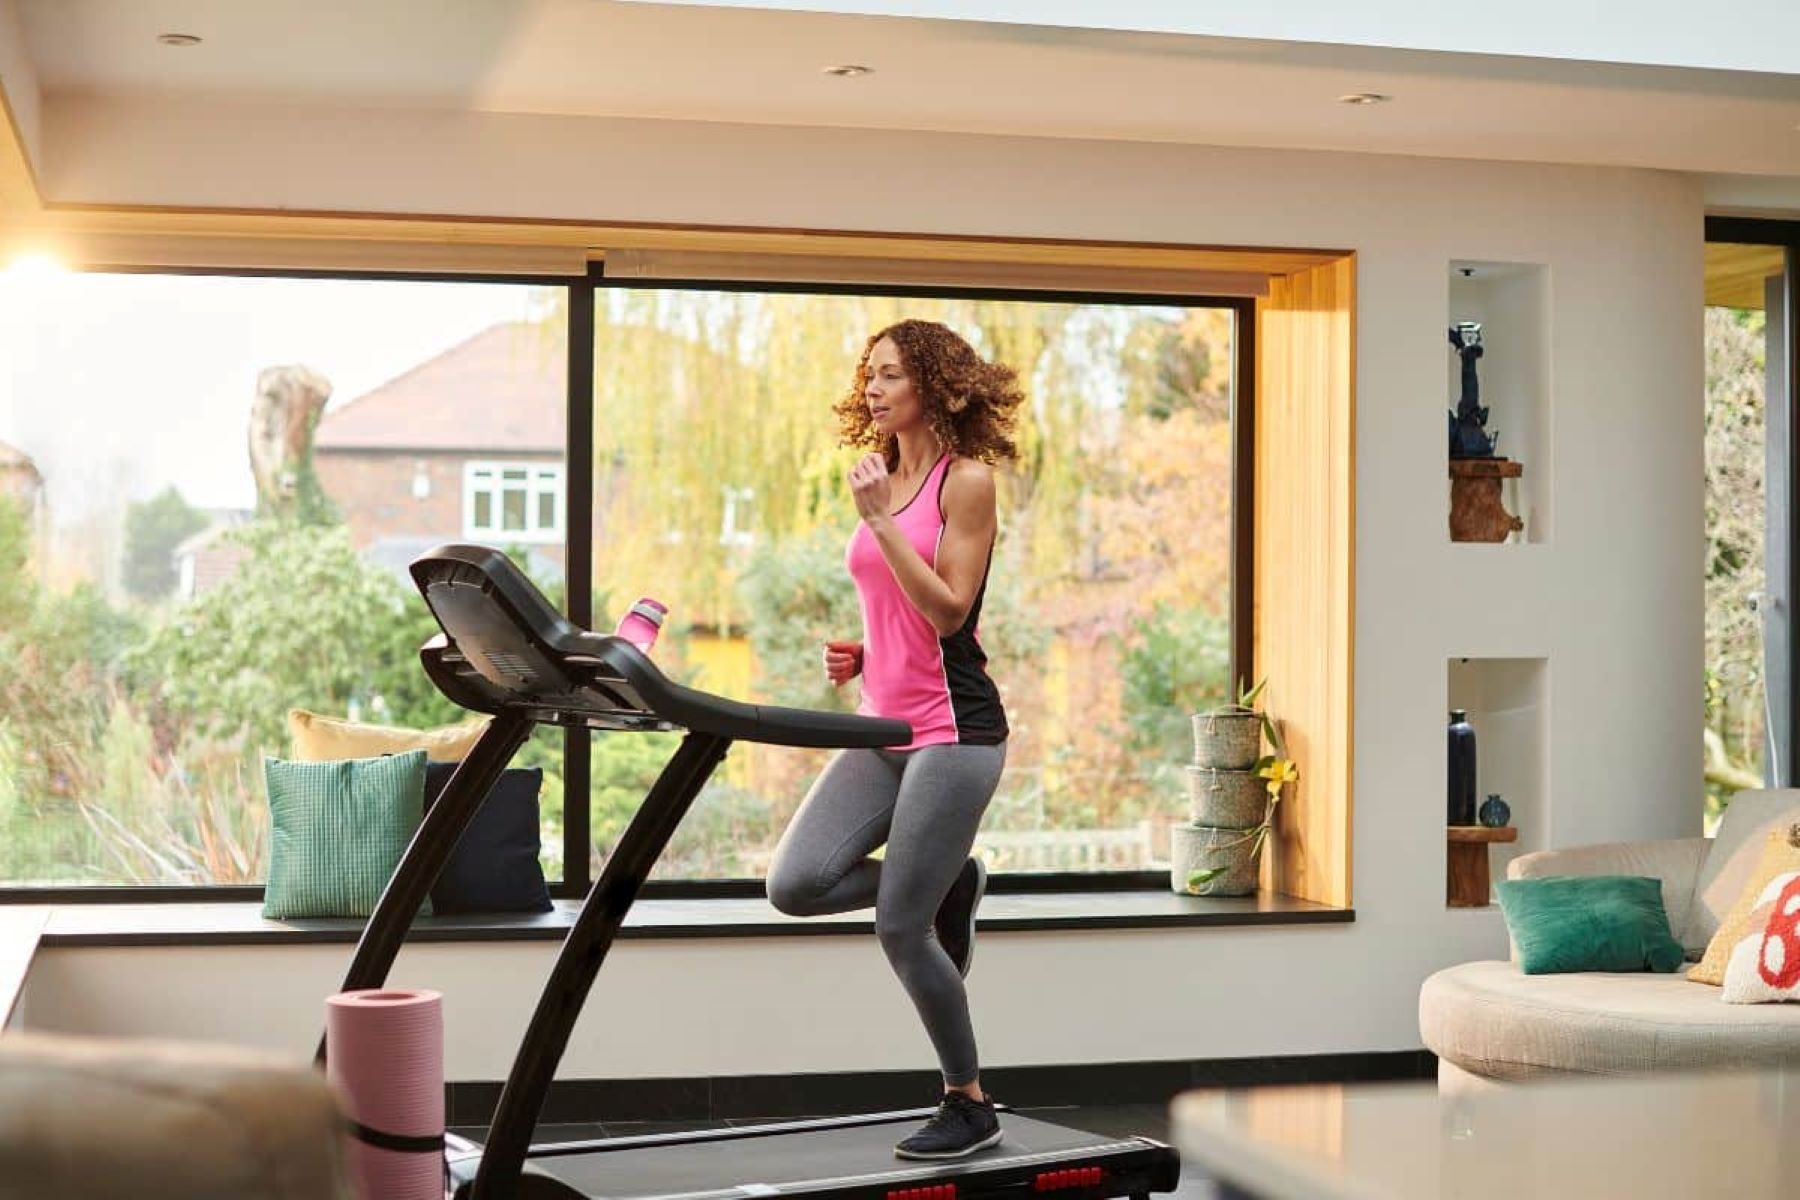 How To Use The Treadmill